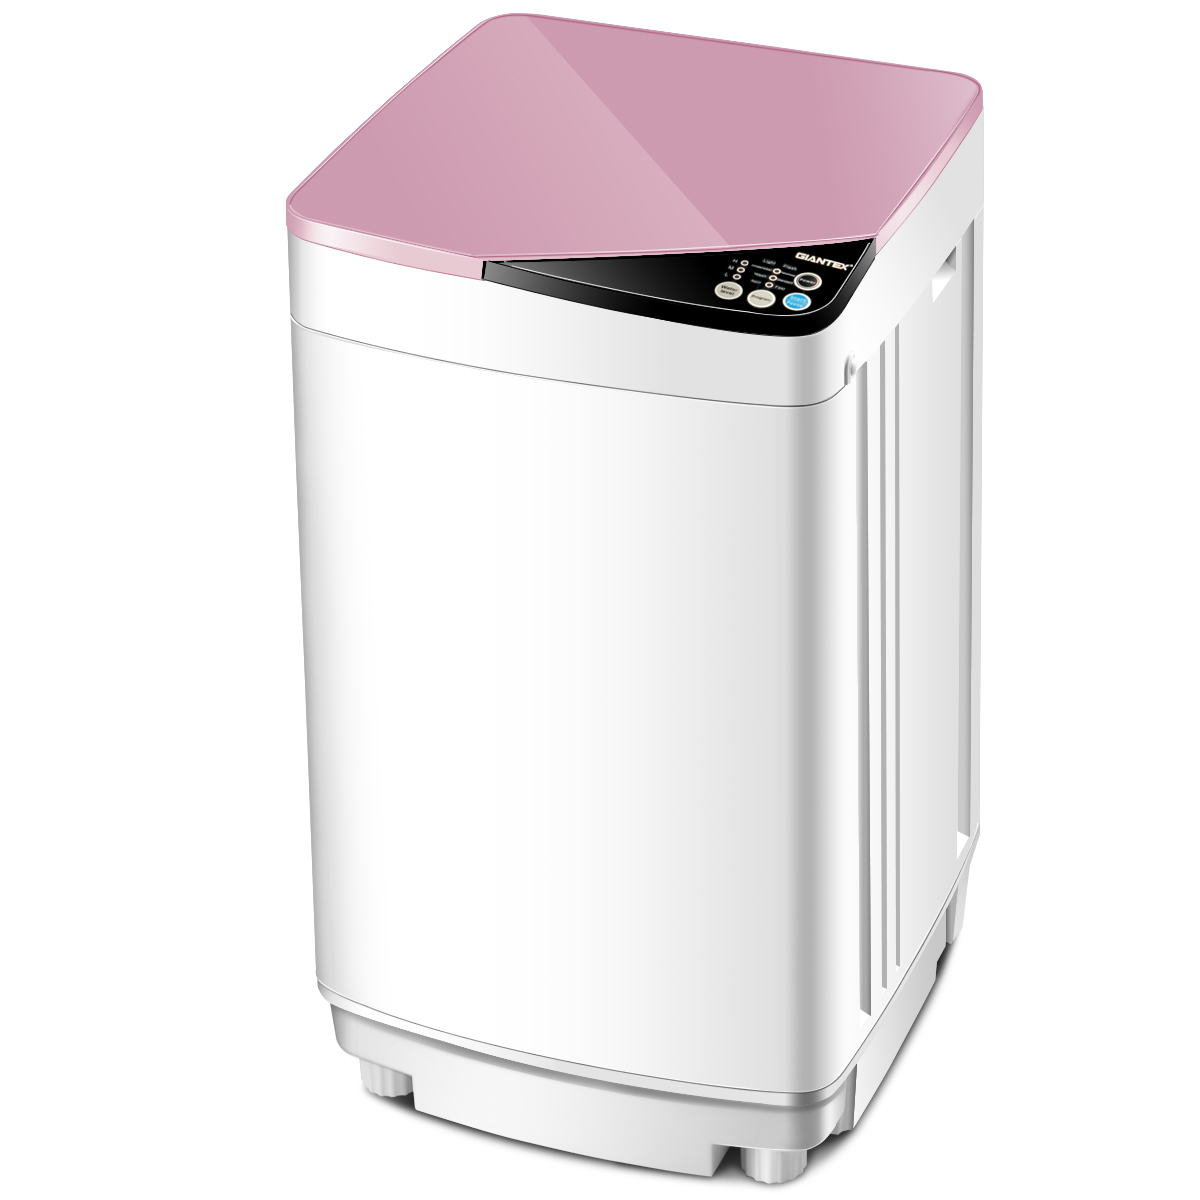 Topbuy Full-Automatic Washing Machine Portable Washer 7.7 lbs Washer/Spinner Pink